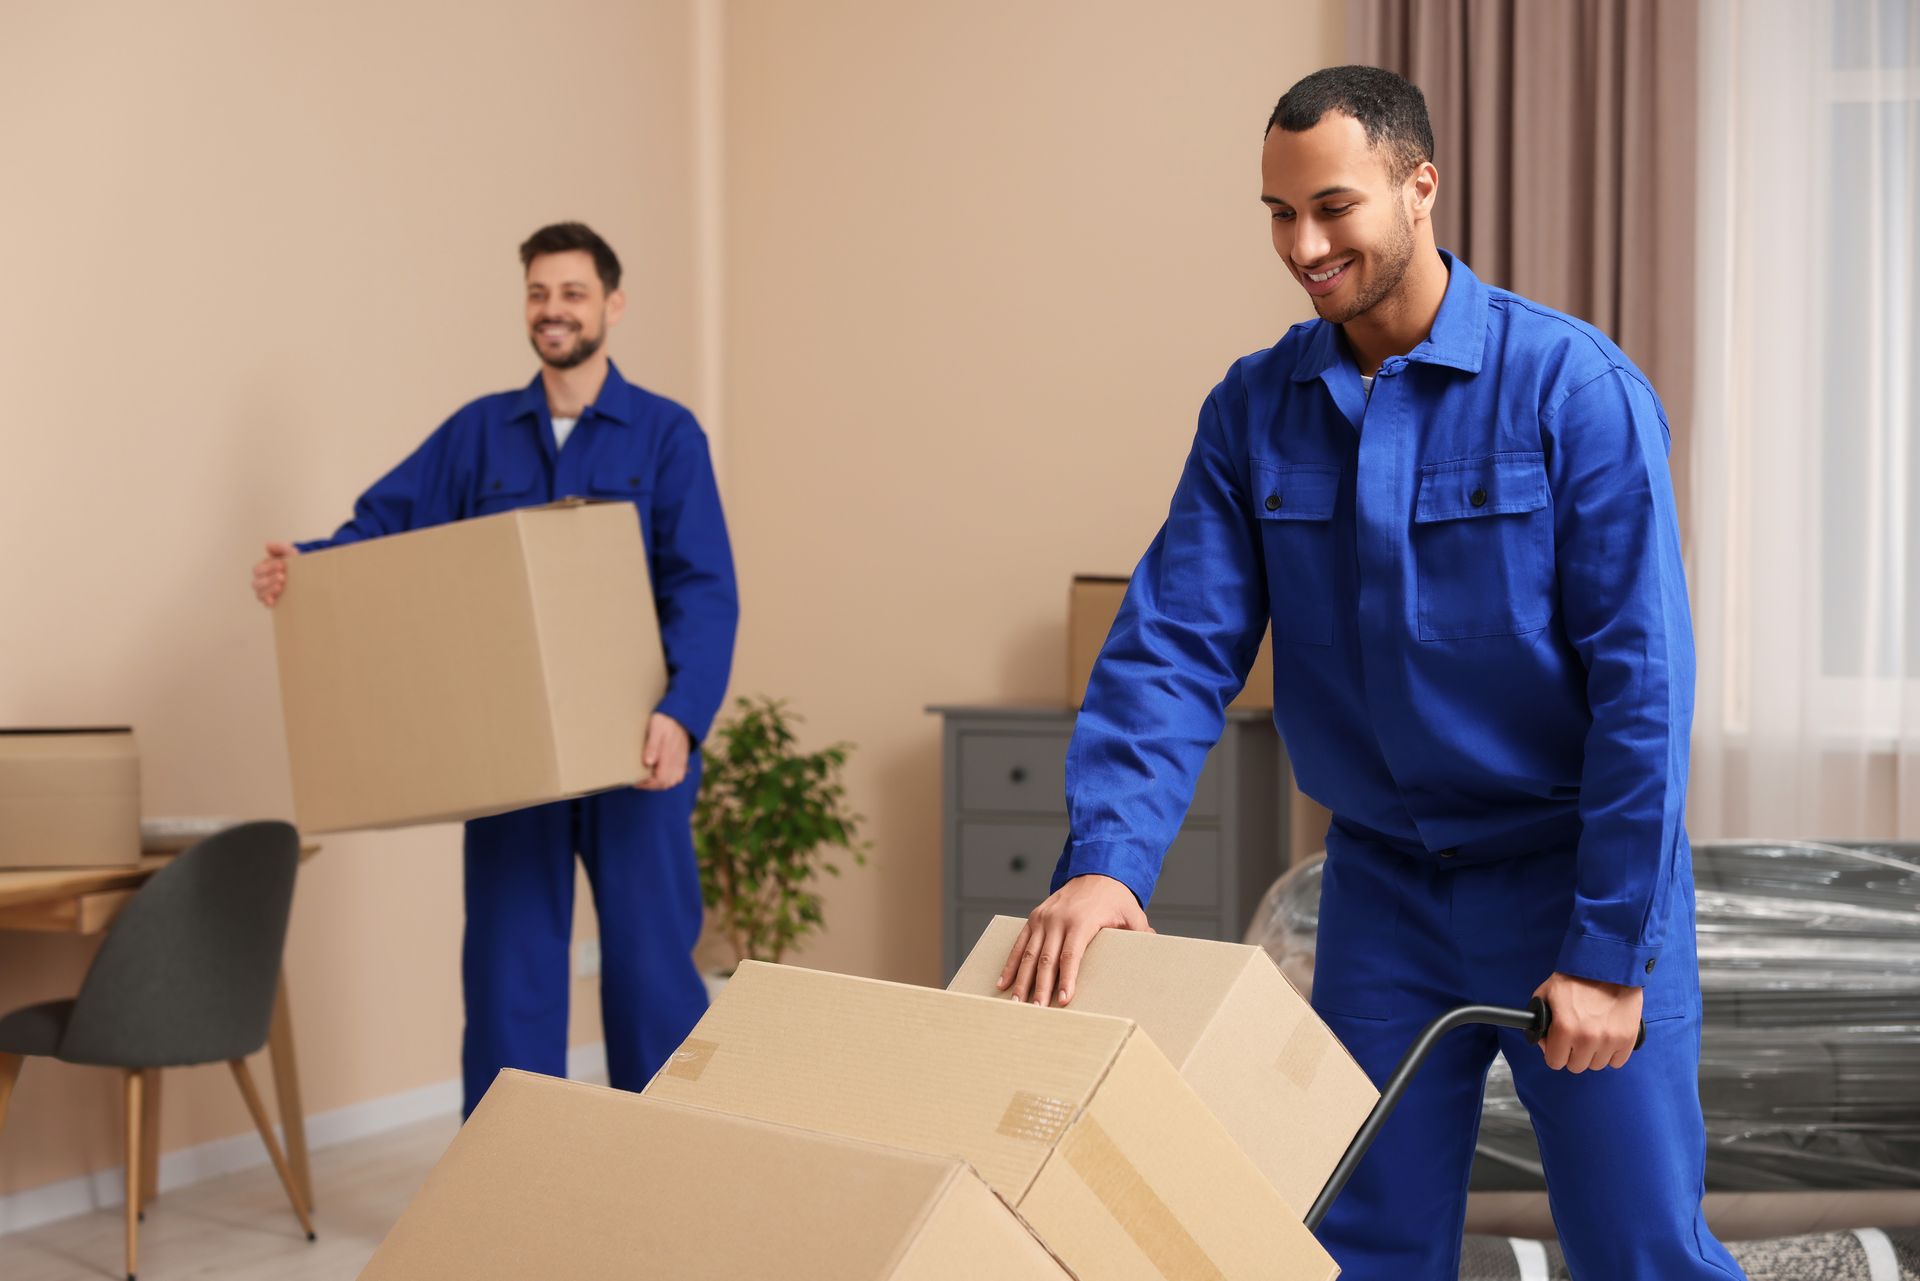 A man and a woman are carrying boxes in a room.